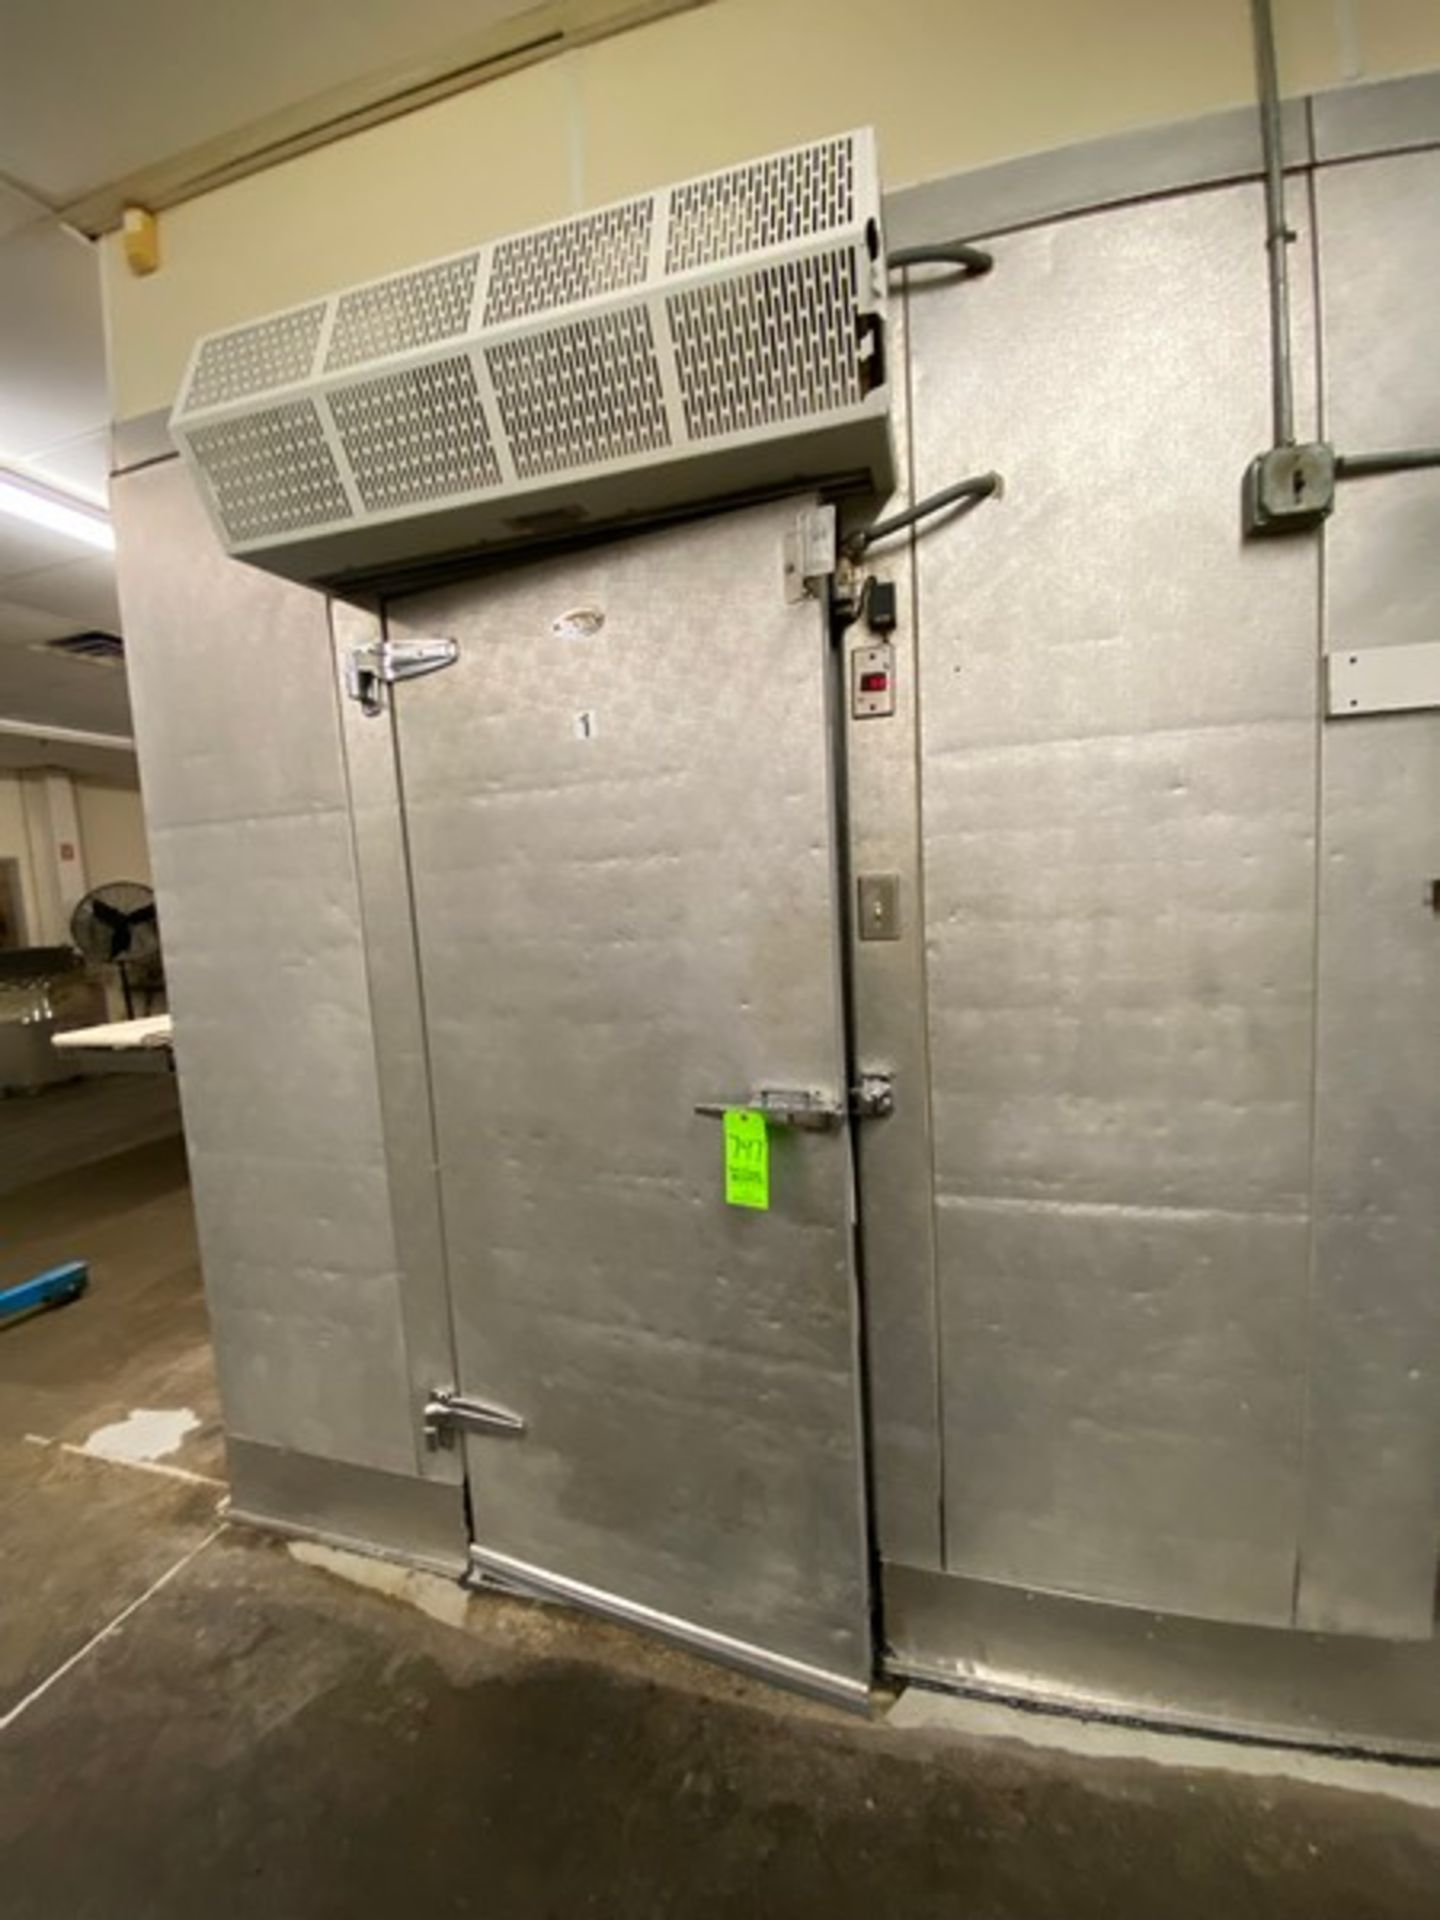 WALK-IN BLAST FREEZER, WITH (2) WERNER 3-FAN BLOWER UNITS INSIDE THE UNITS, WITH (2) DOORS (LOCATED - Image 2 of 6